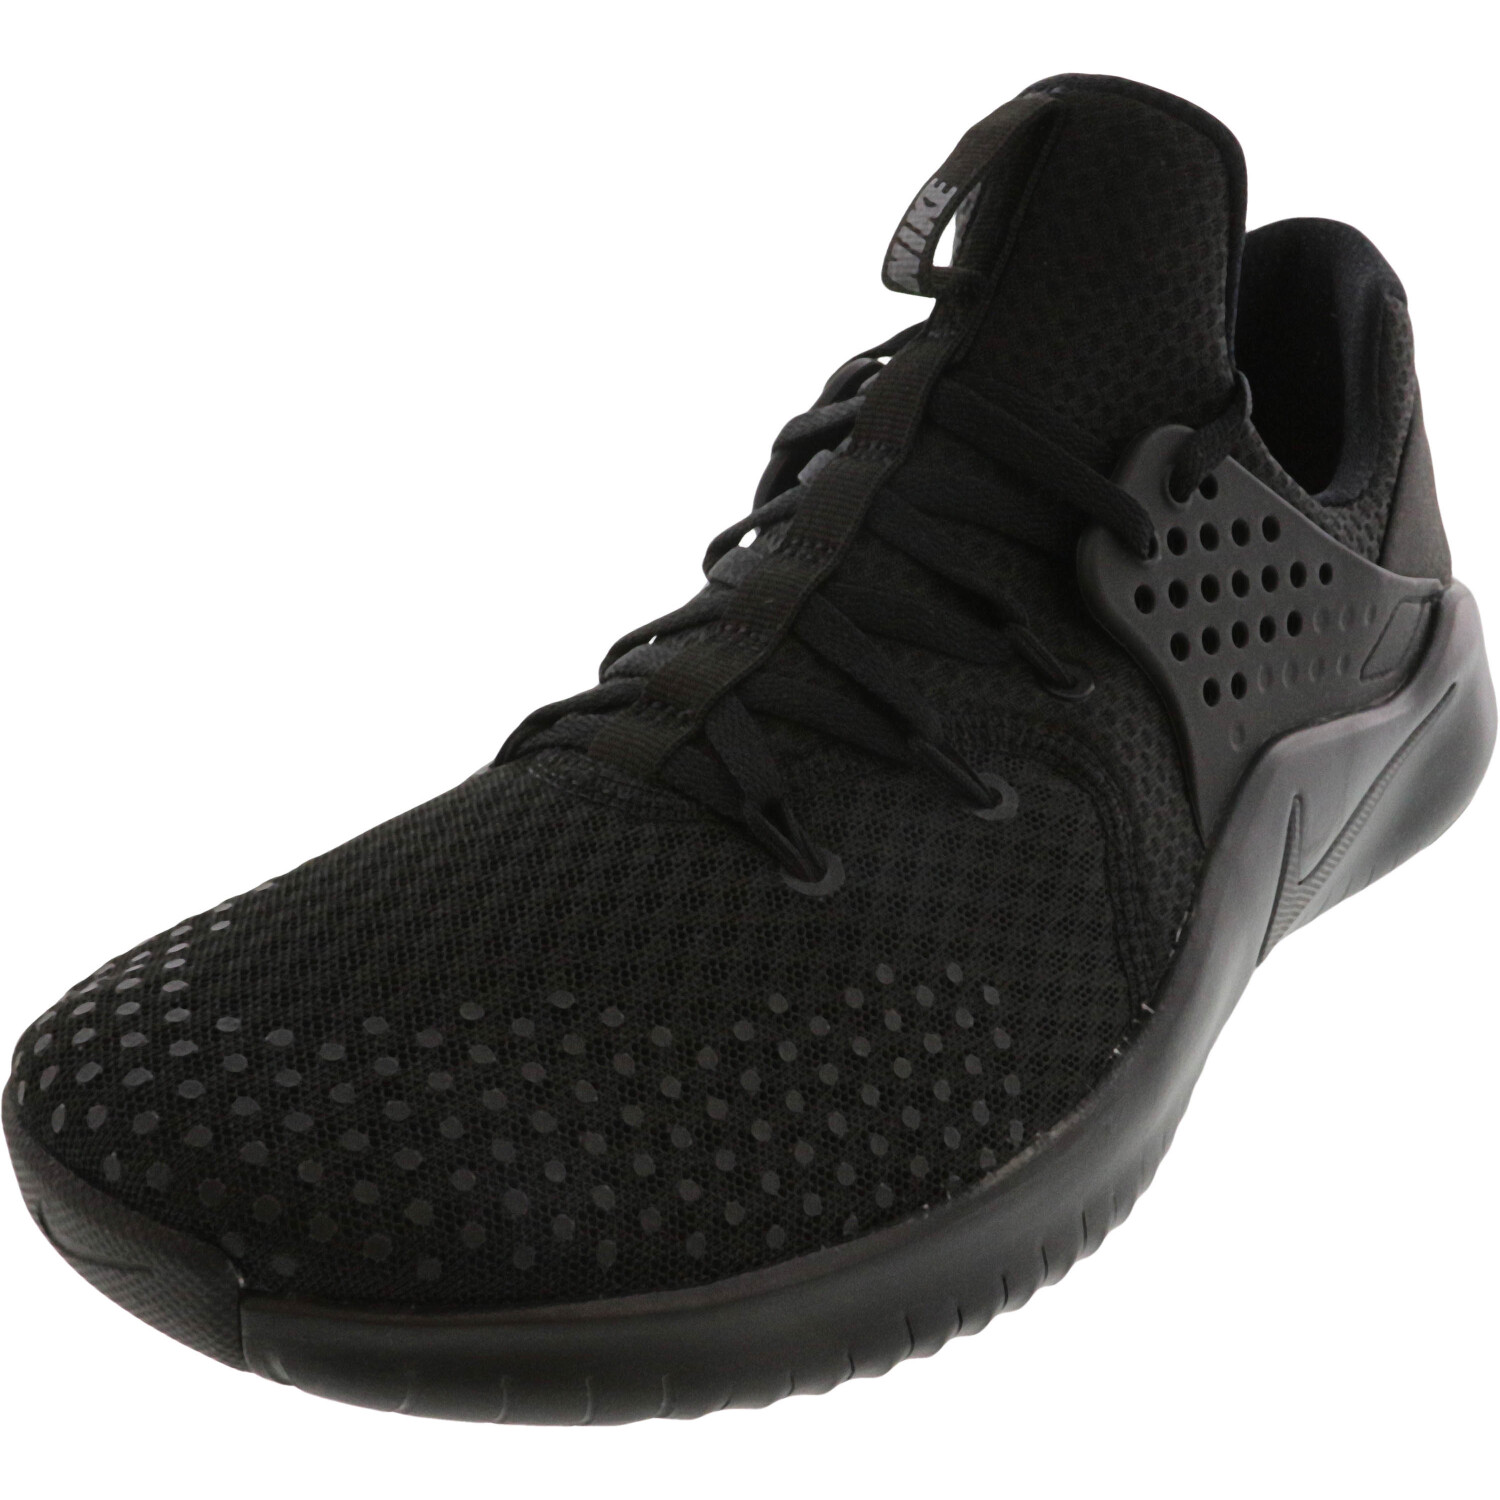 Nike Men's Free Trainer Viii Black / Ankle-High Fabric Training Shoes - 10M - image 1 of 3